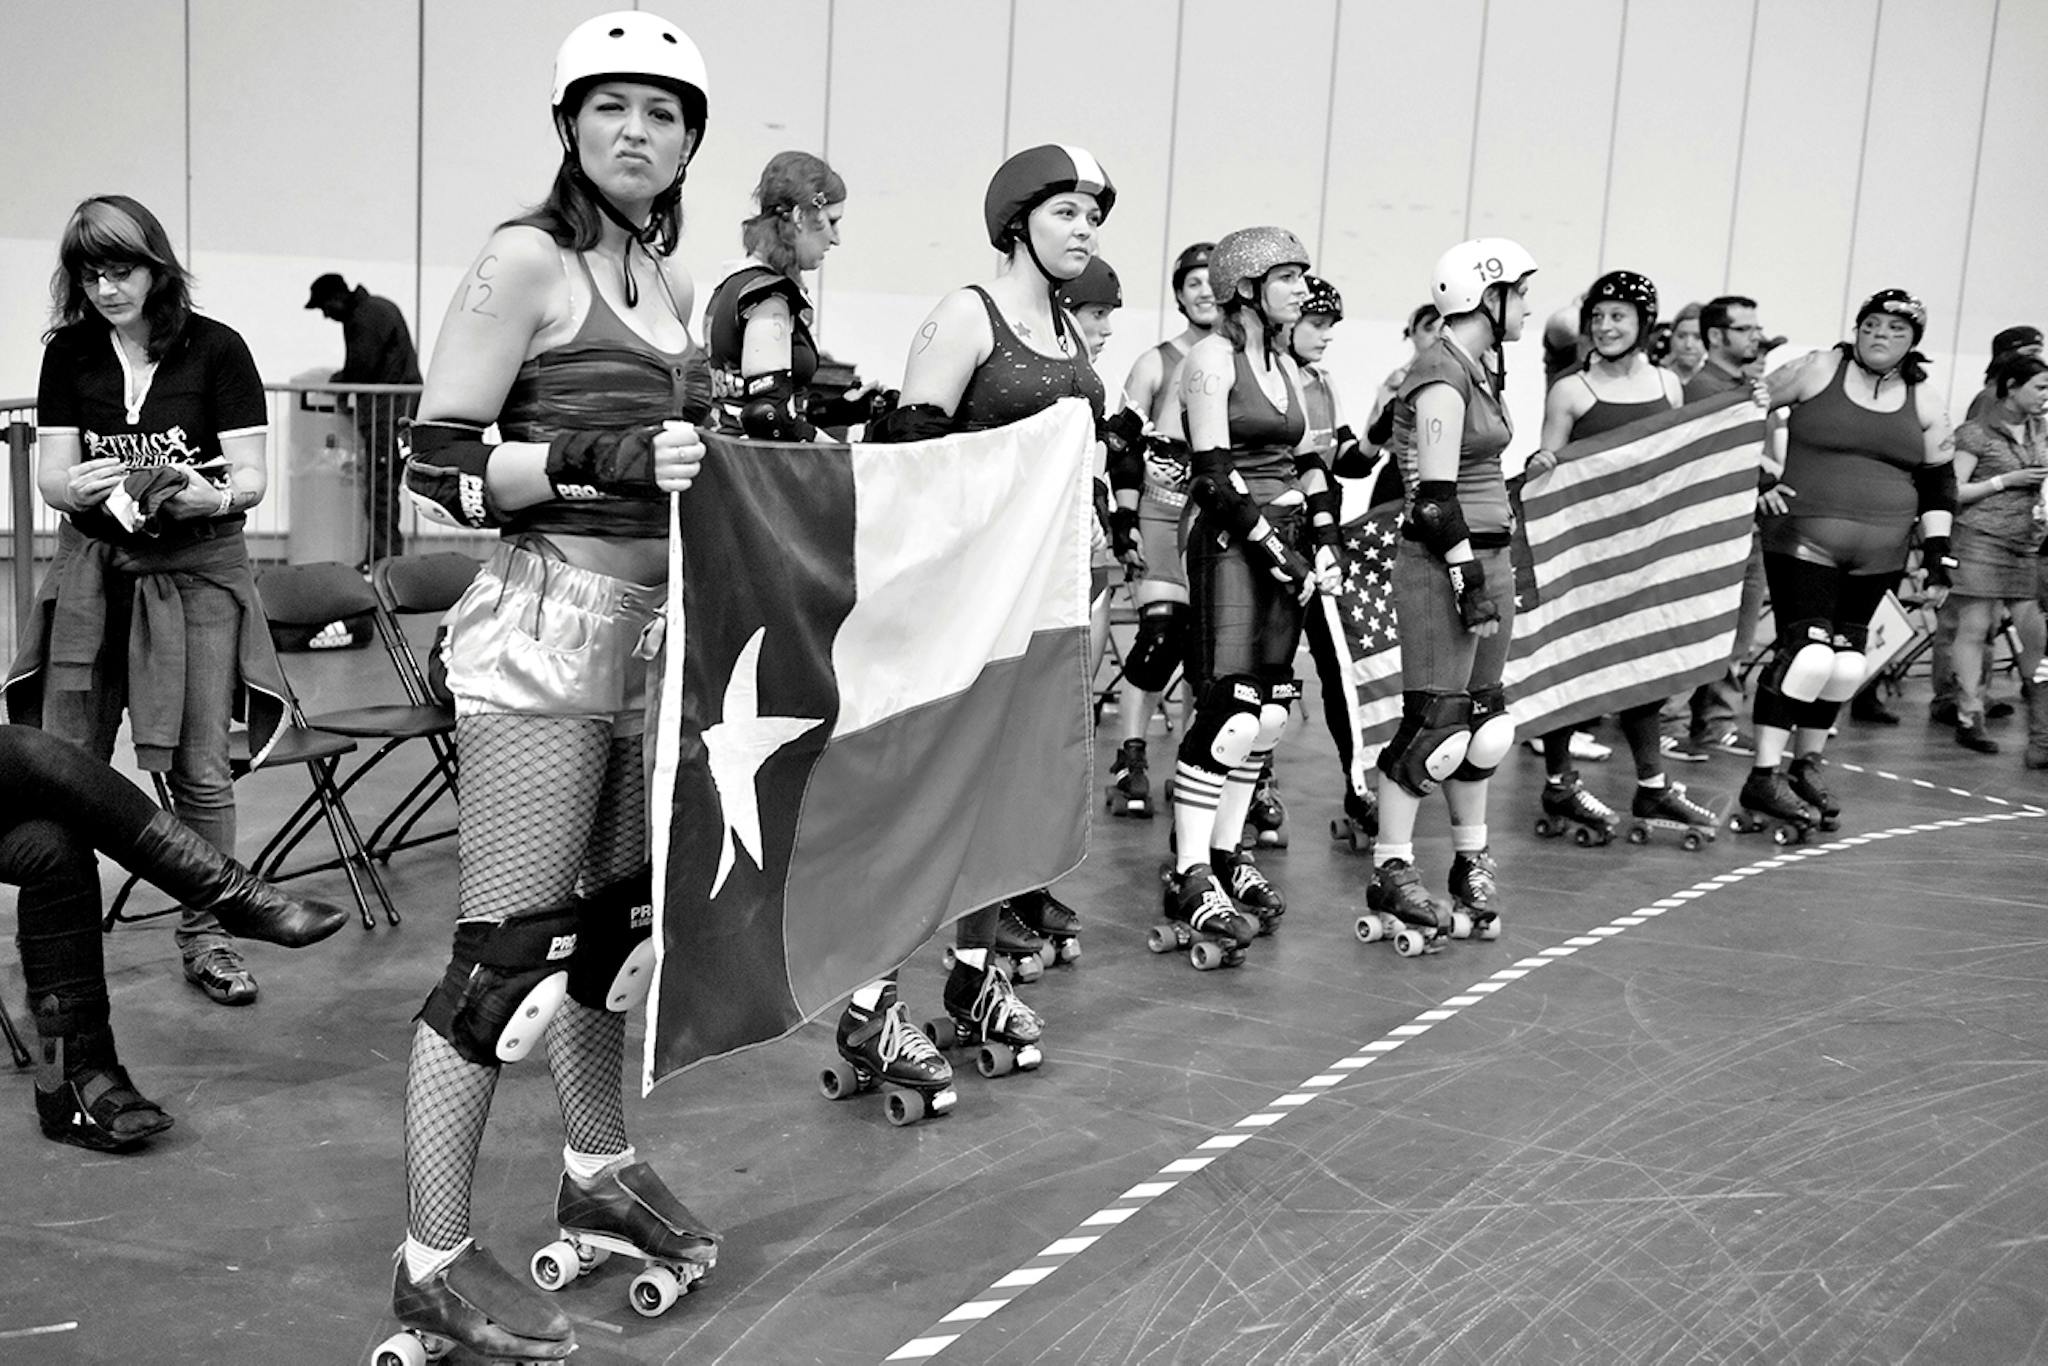 Members of the Texas Rollergirls hold Texas and American flags at a tournament in London